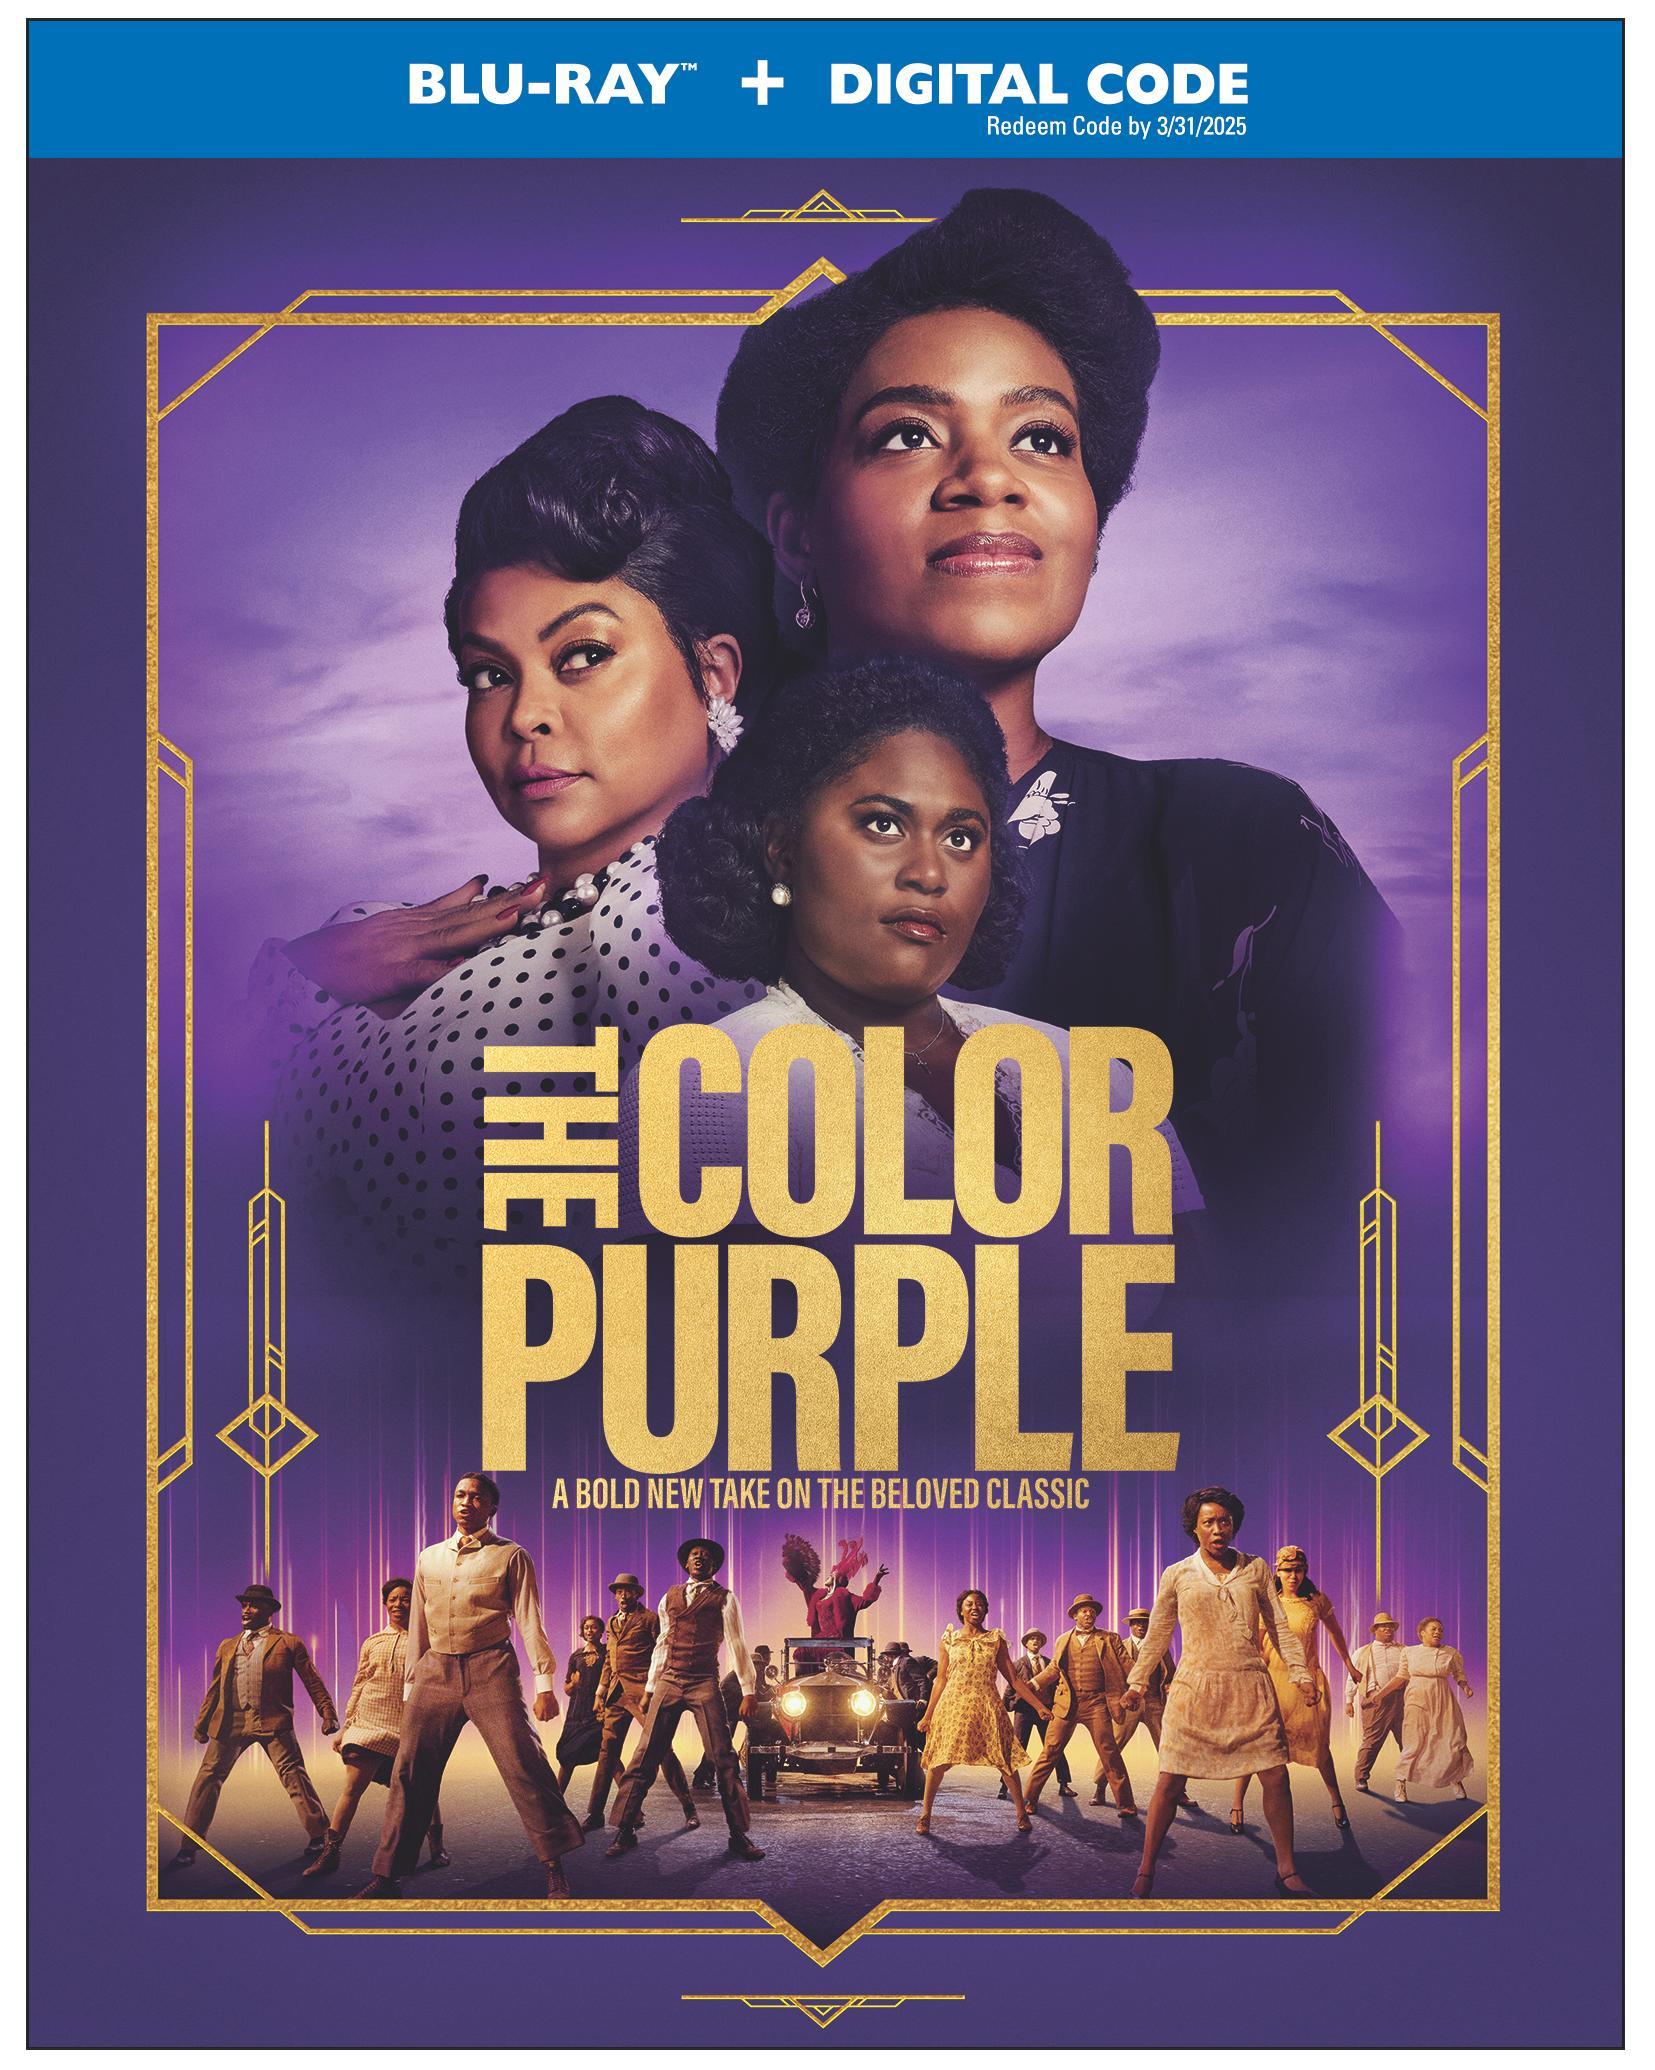 The Color Purple - Blu-ray   - Musical Movies On Blu-ray - Movies On GRUV